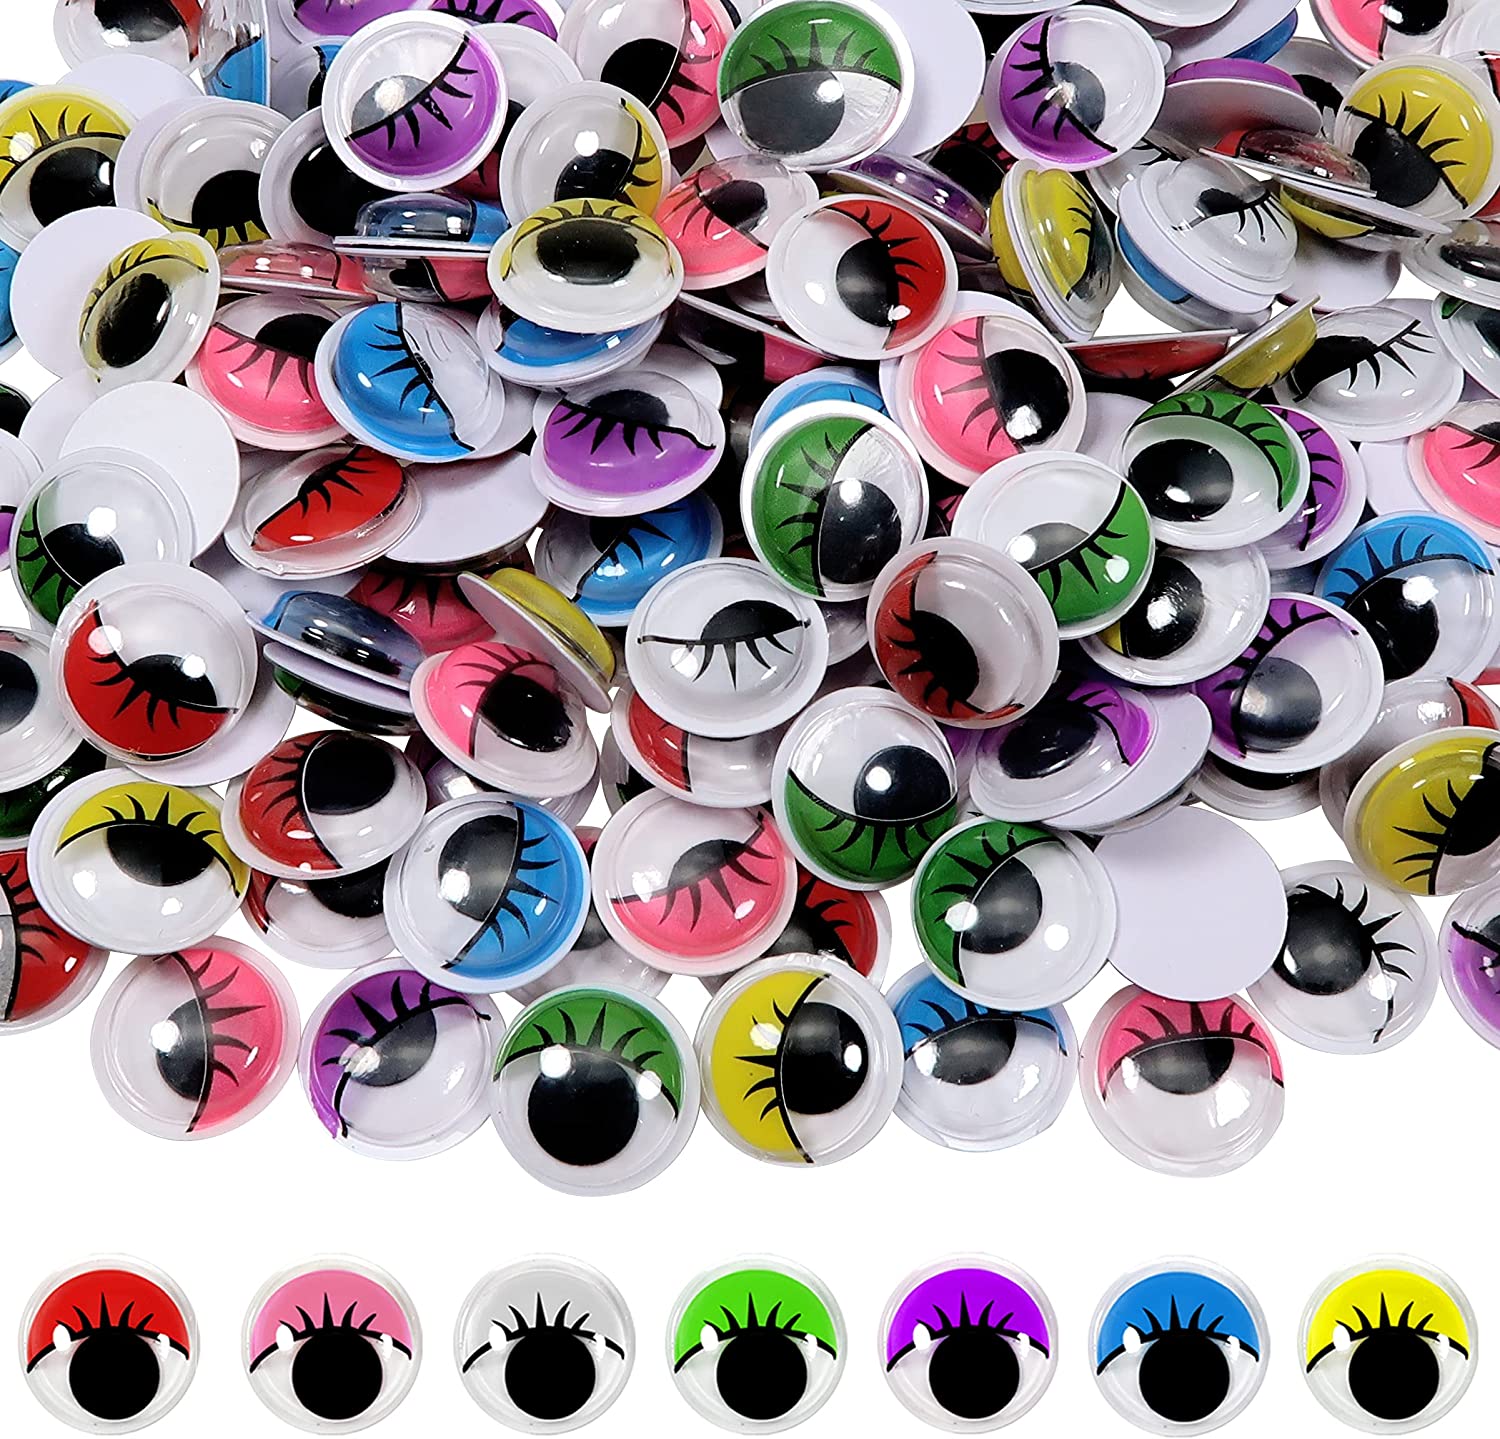 Yirtree 50pcs 20mm Plastic Wiggle Eyes with Eyelashes Googly Eyes Self  Adhesive Assorted Colors Craft Stickers Eyes for DIY Arts Scrapbooking  Decoration 